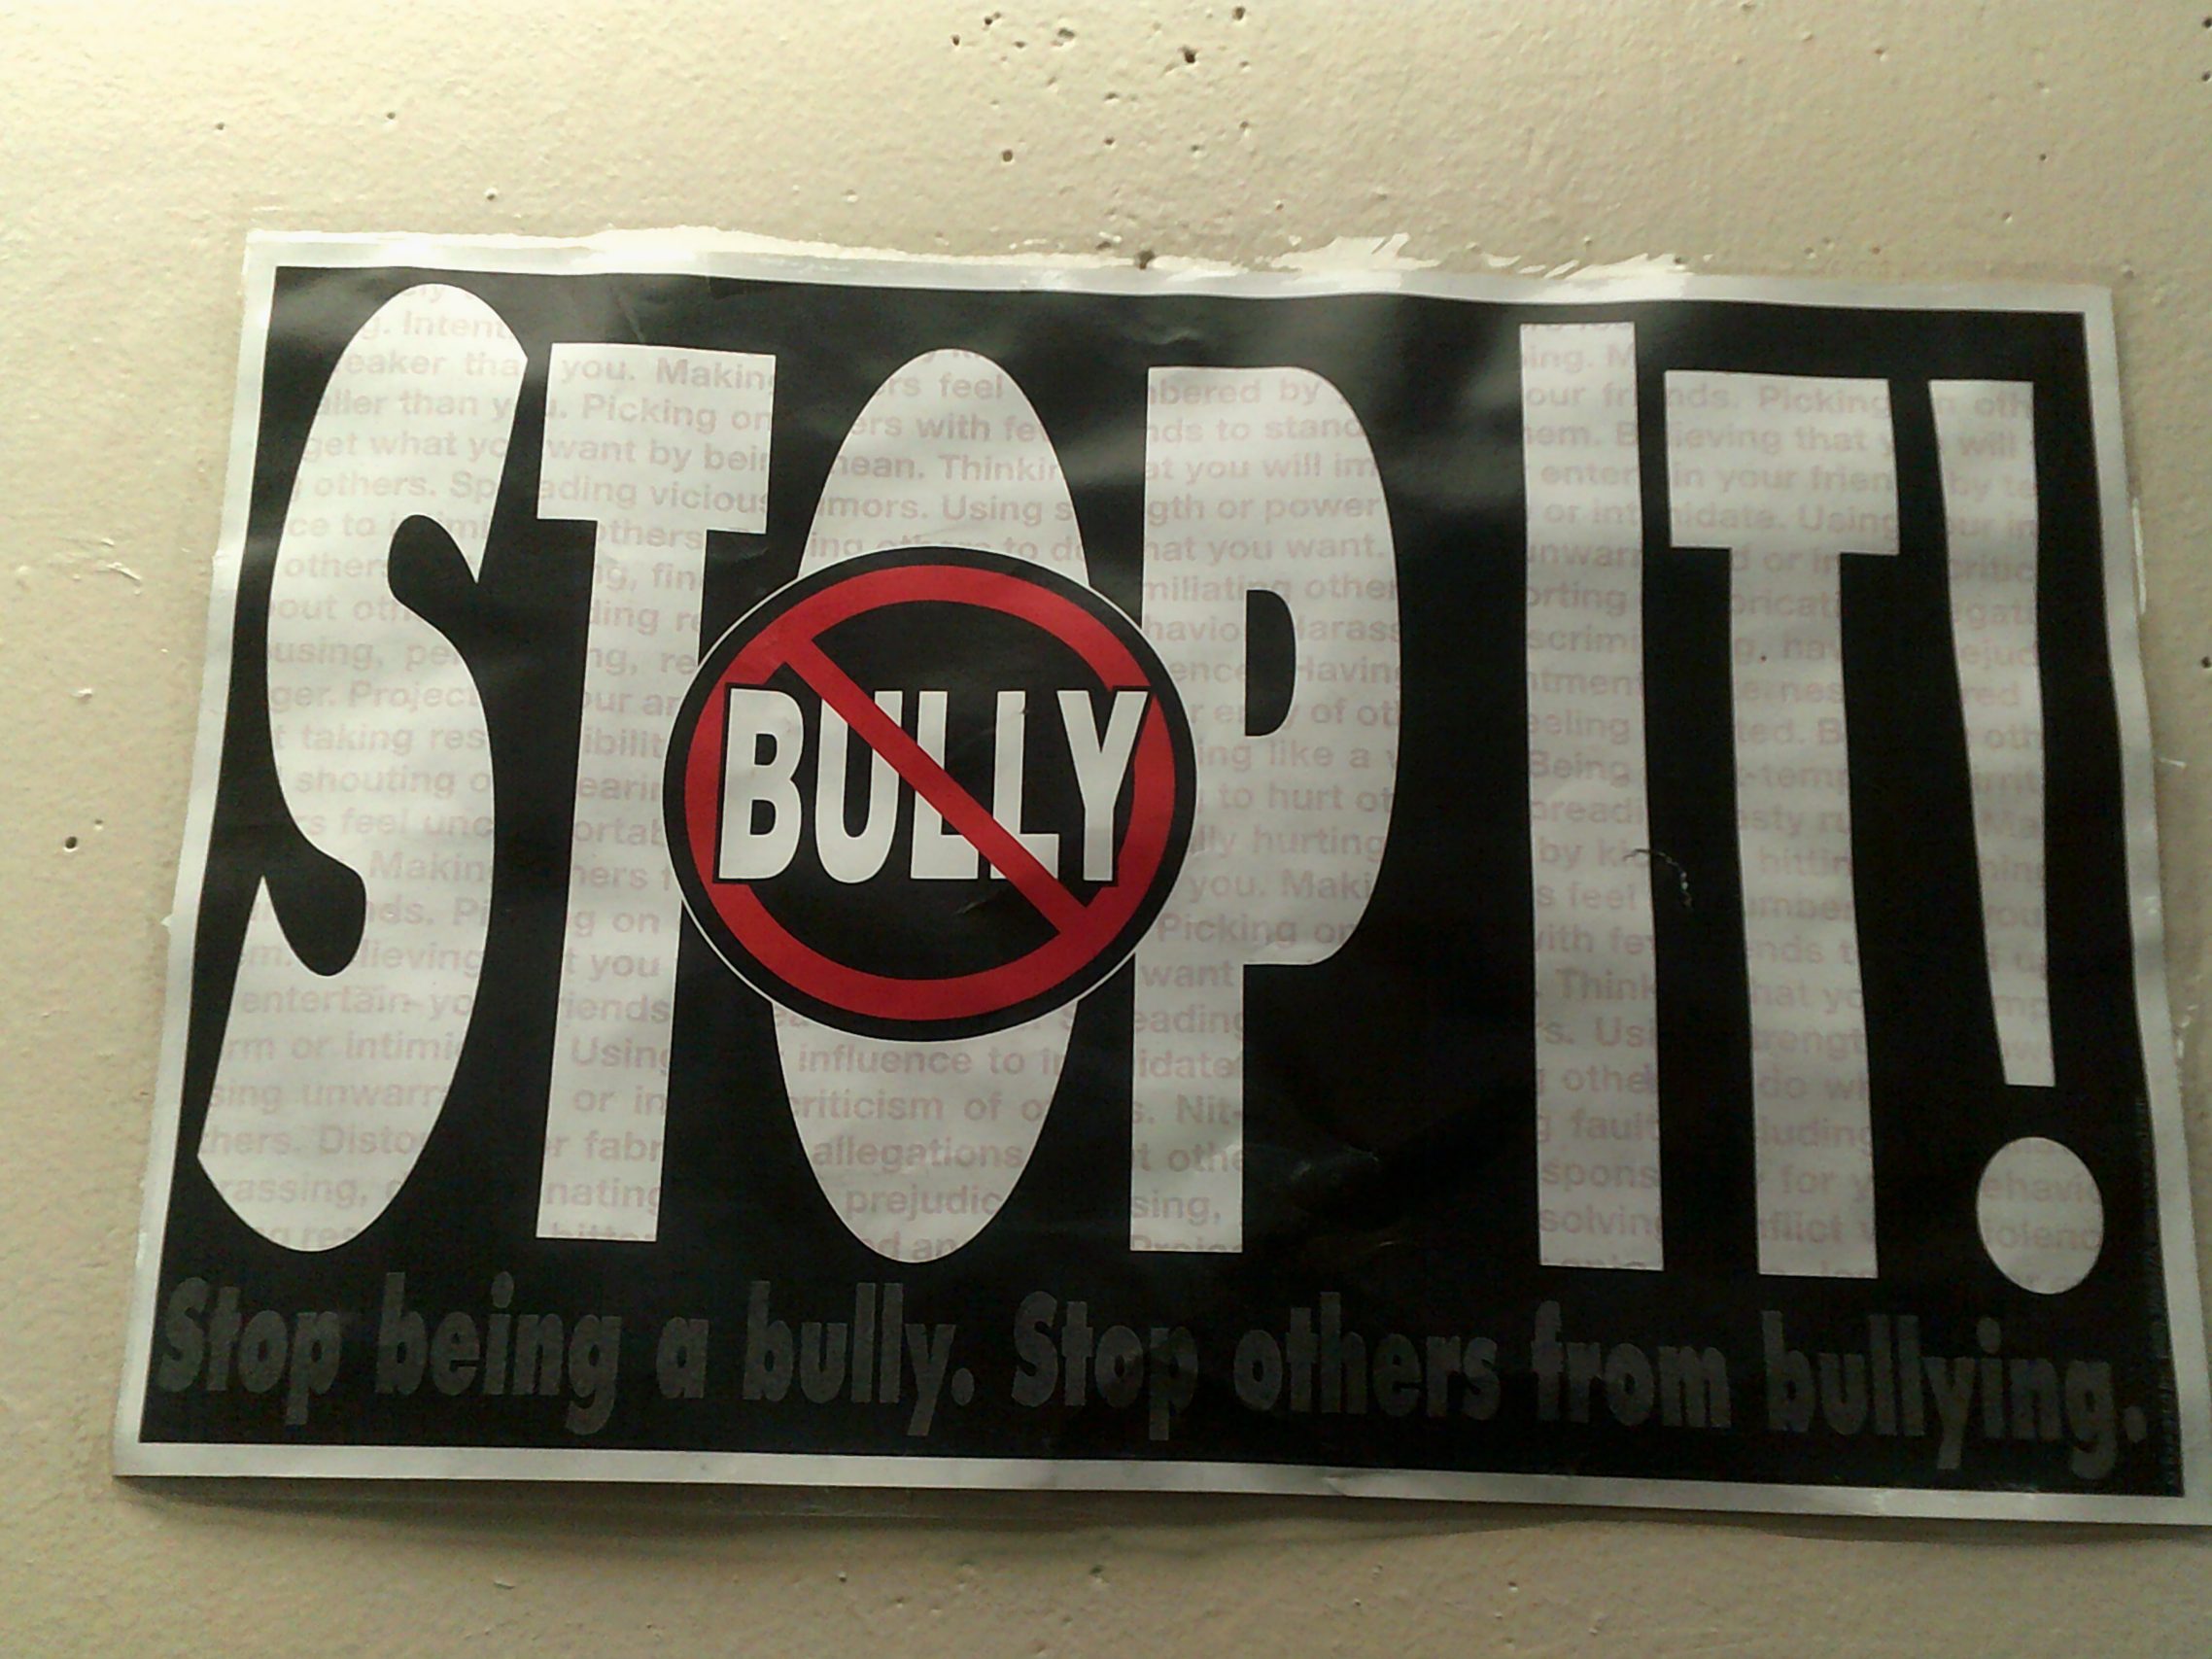 Elkin student Camron takes a photo of a "Stop bullting" poster at school.
